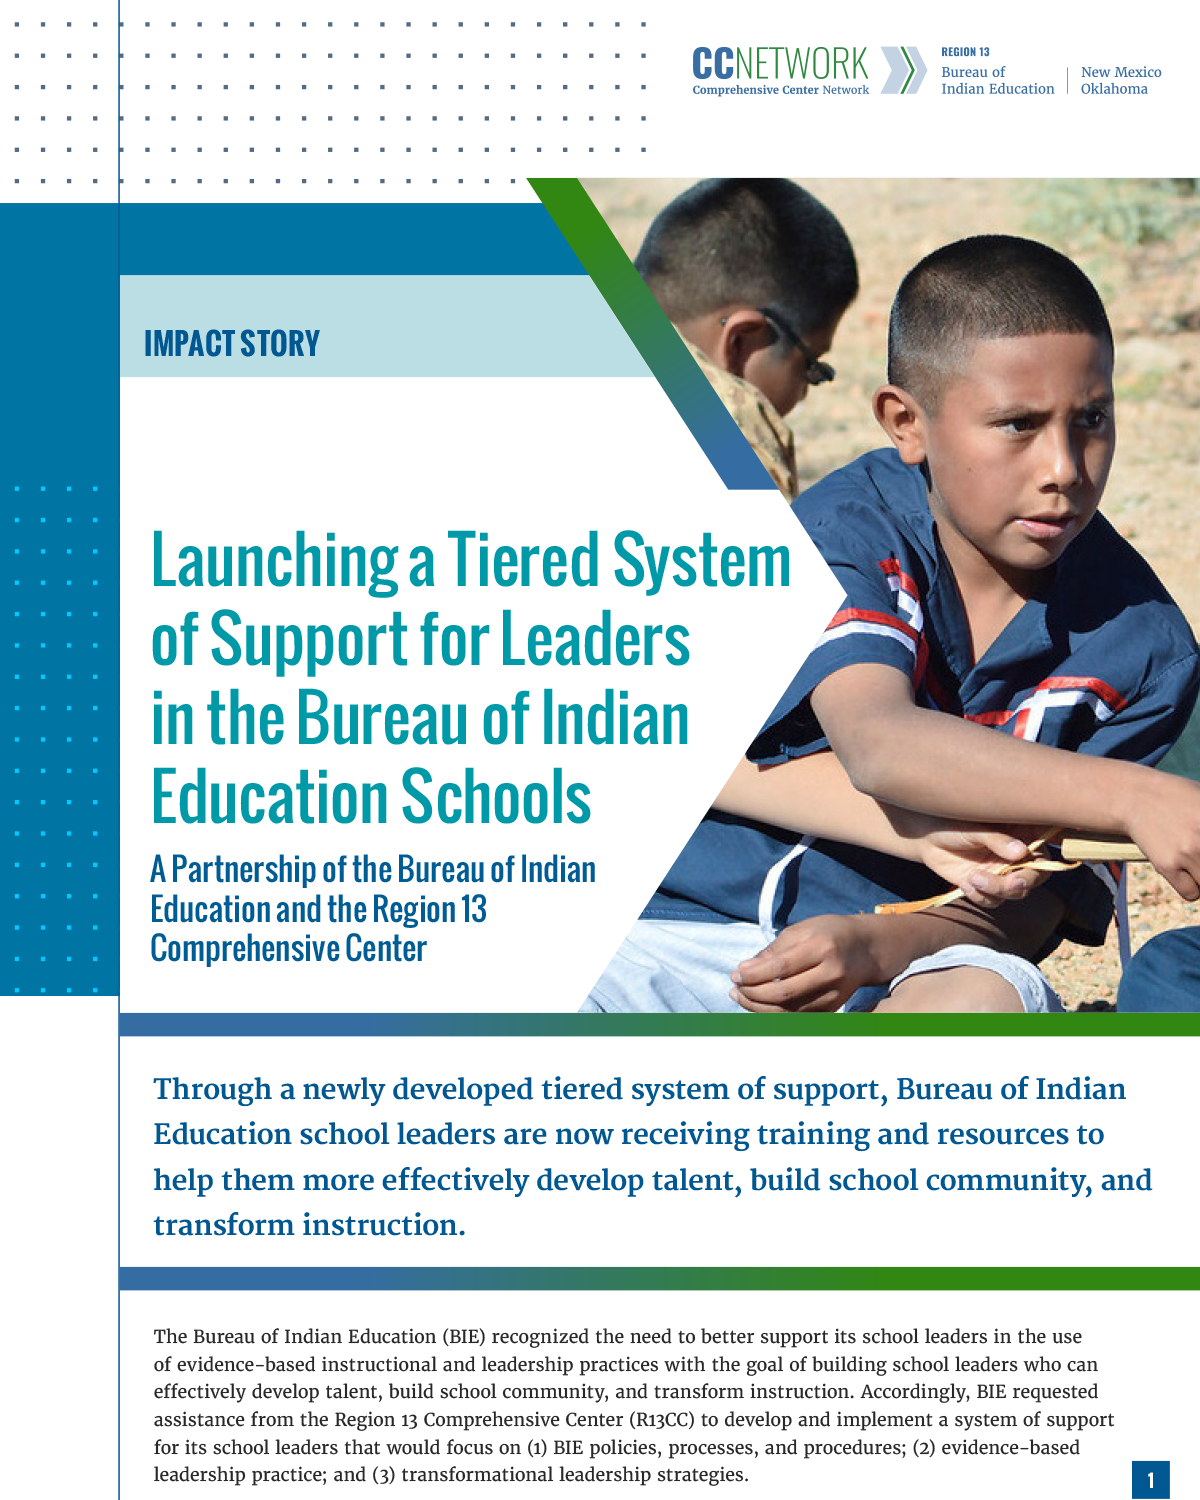 Launching a Tiered System of Support for Leaders in the Bureau of Indian Education Schools